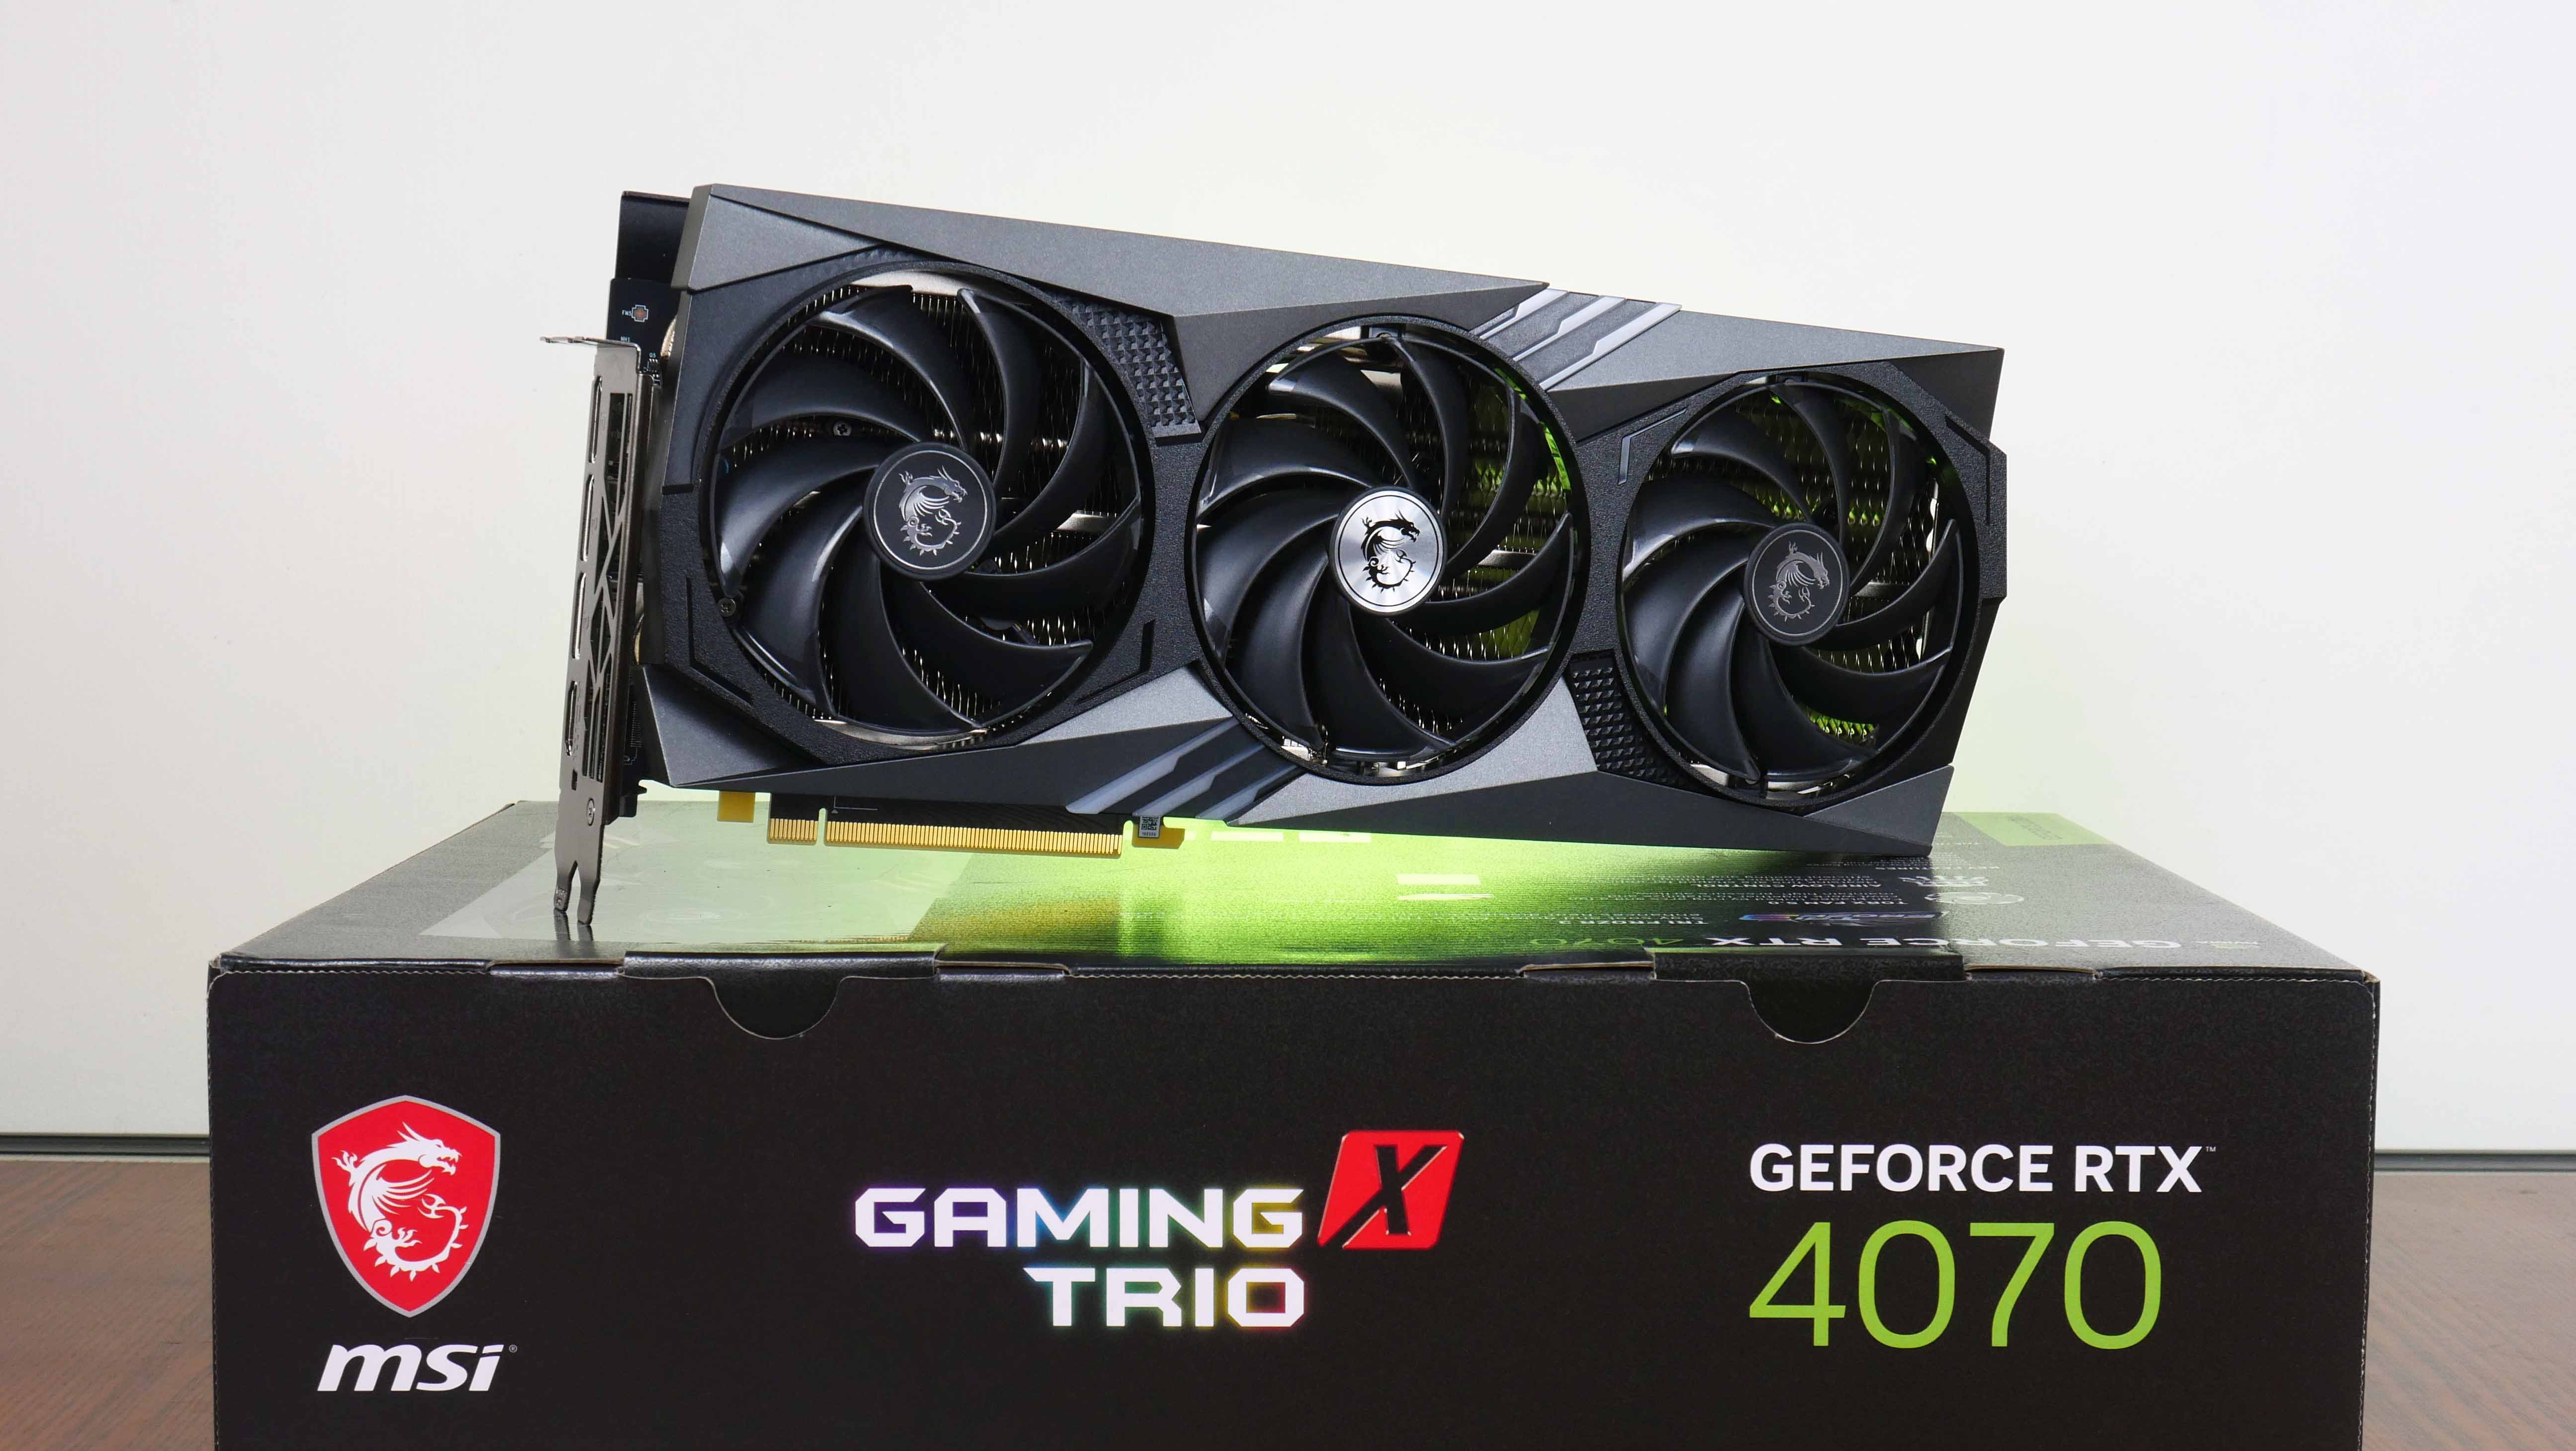 RTX 4060 vs RTX 4070 - Worth Paying More for RTX 4070? : r